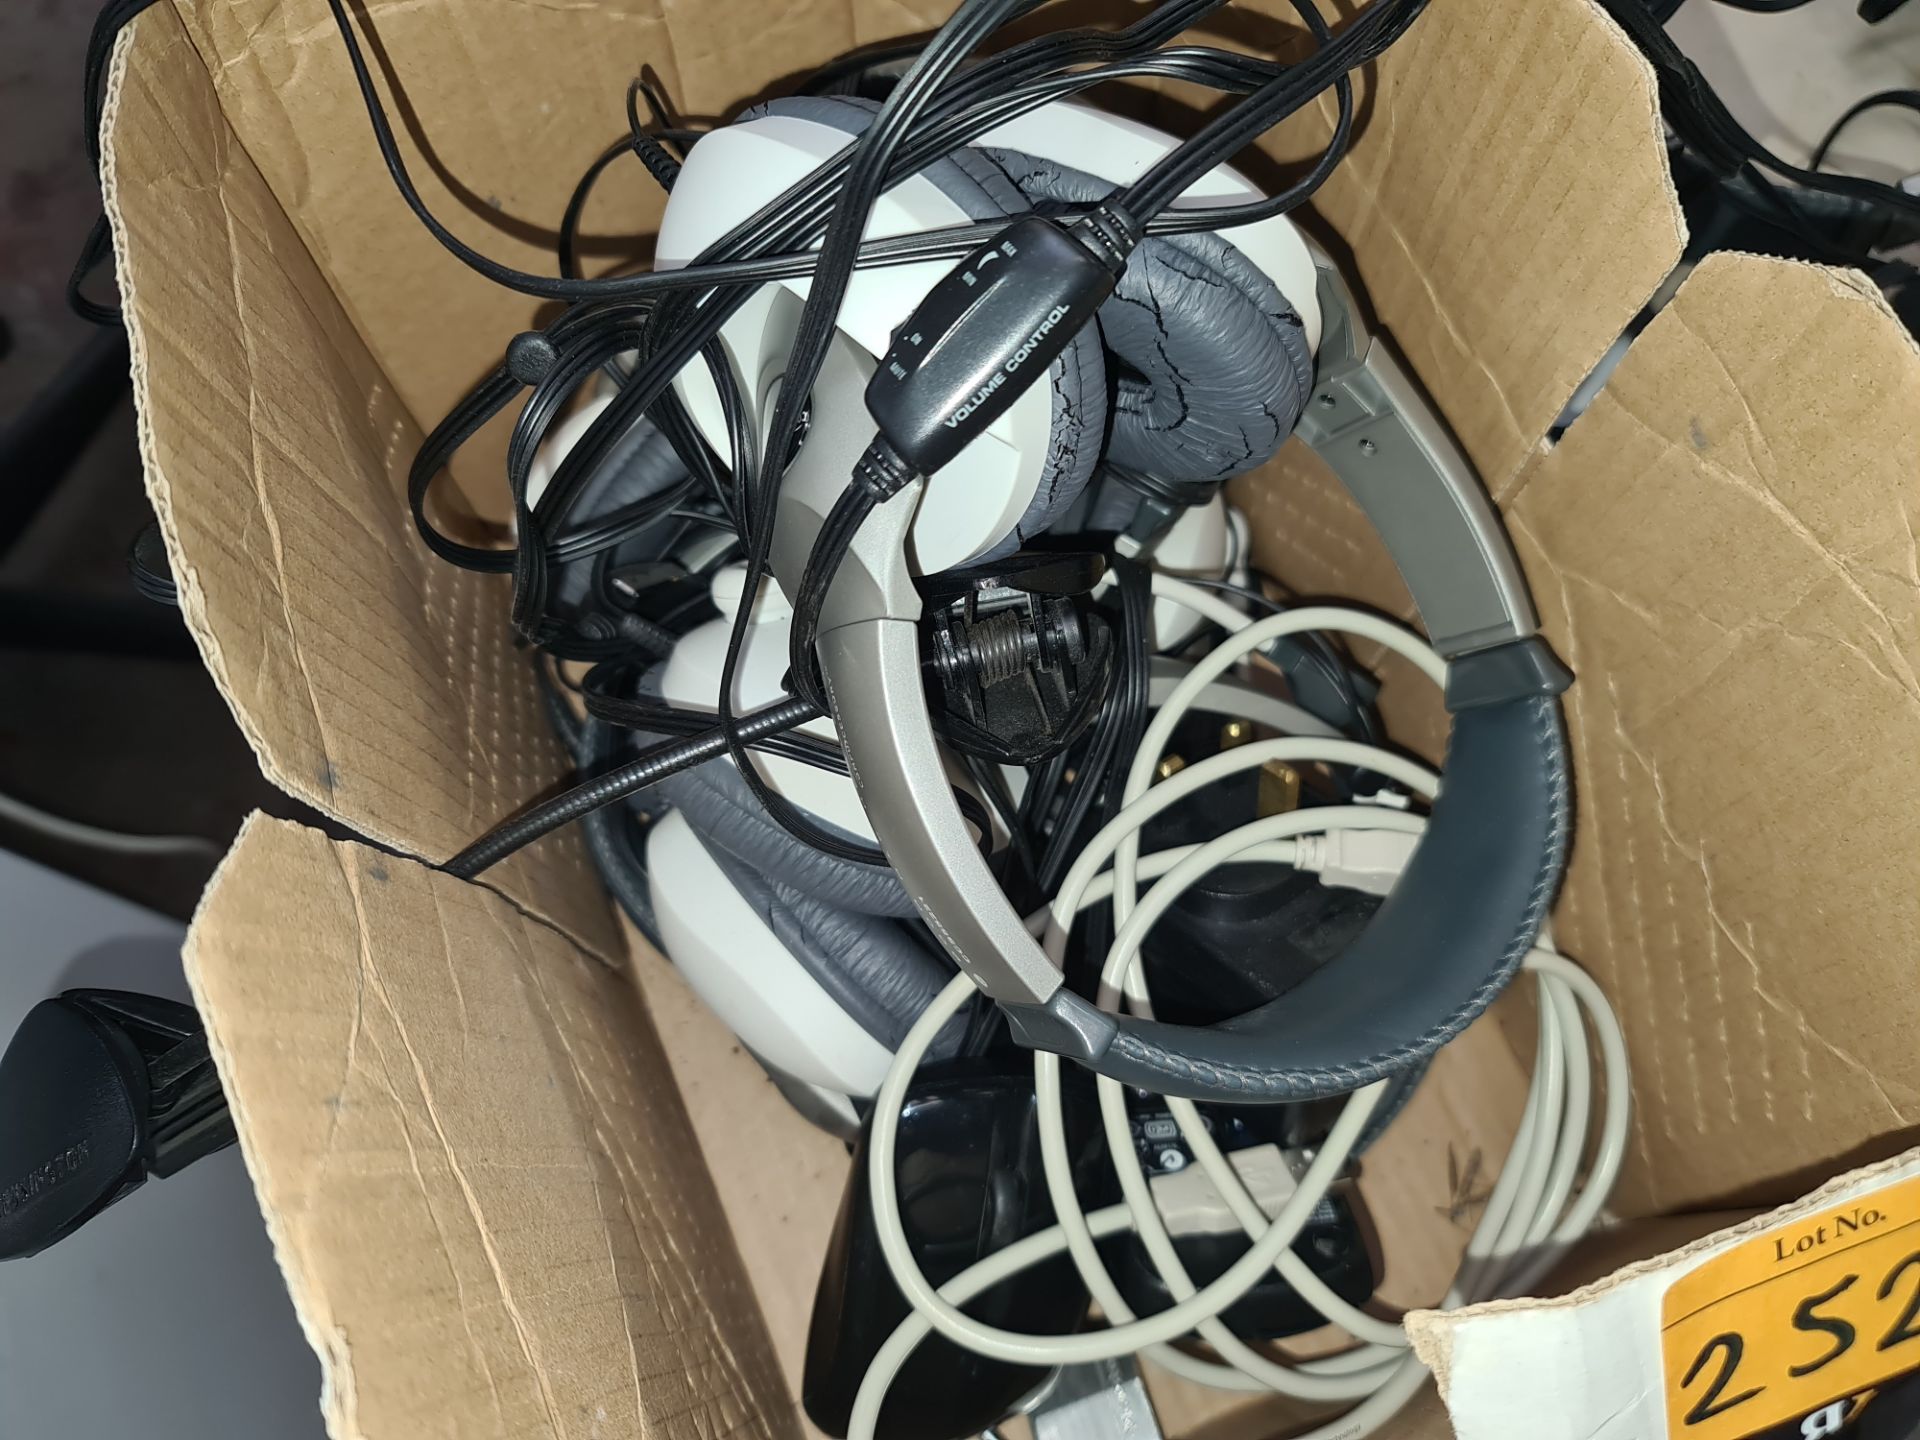 7 off Compucessory boom mic headsets plus other IT related items - Image 7 of 7